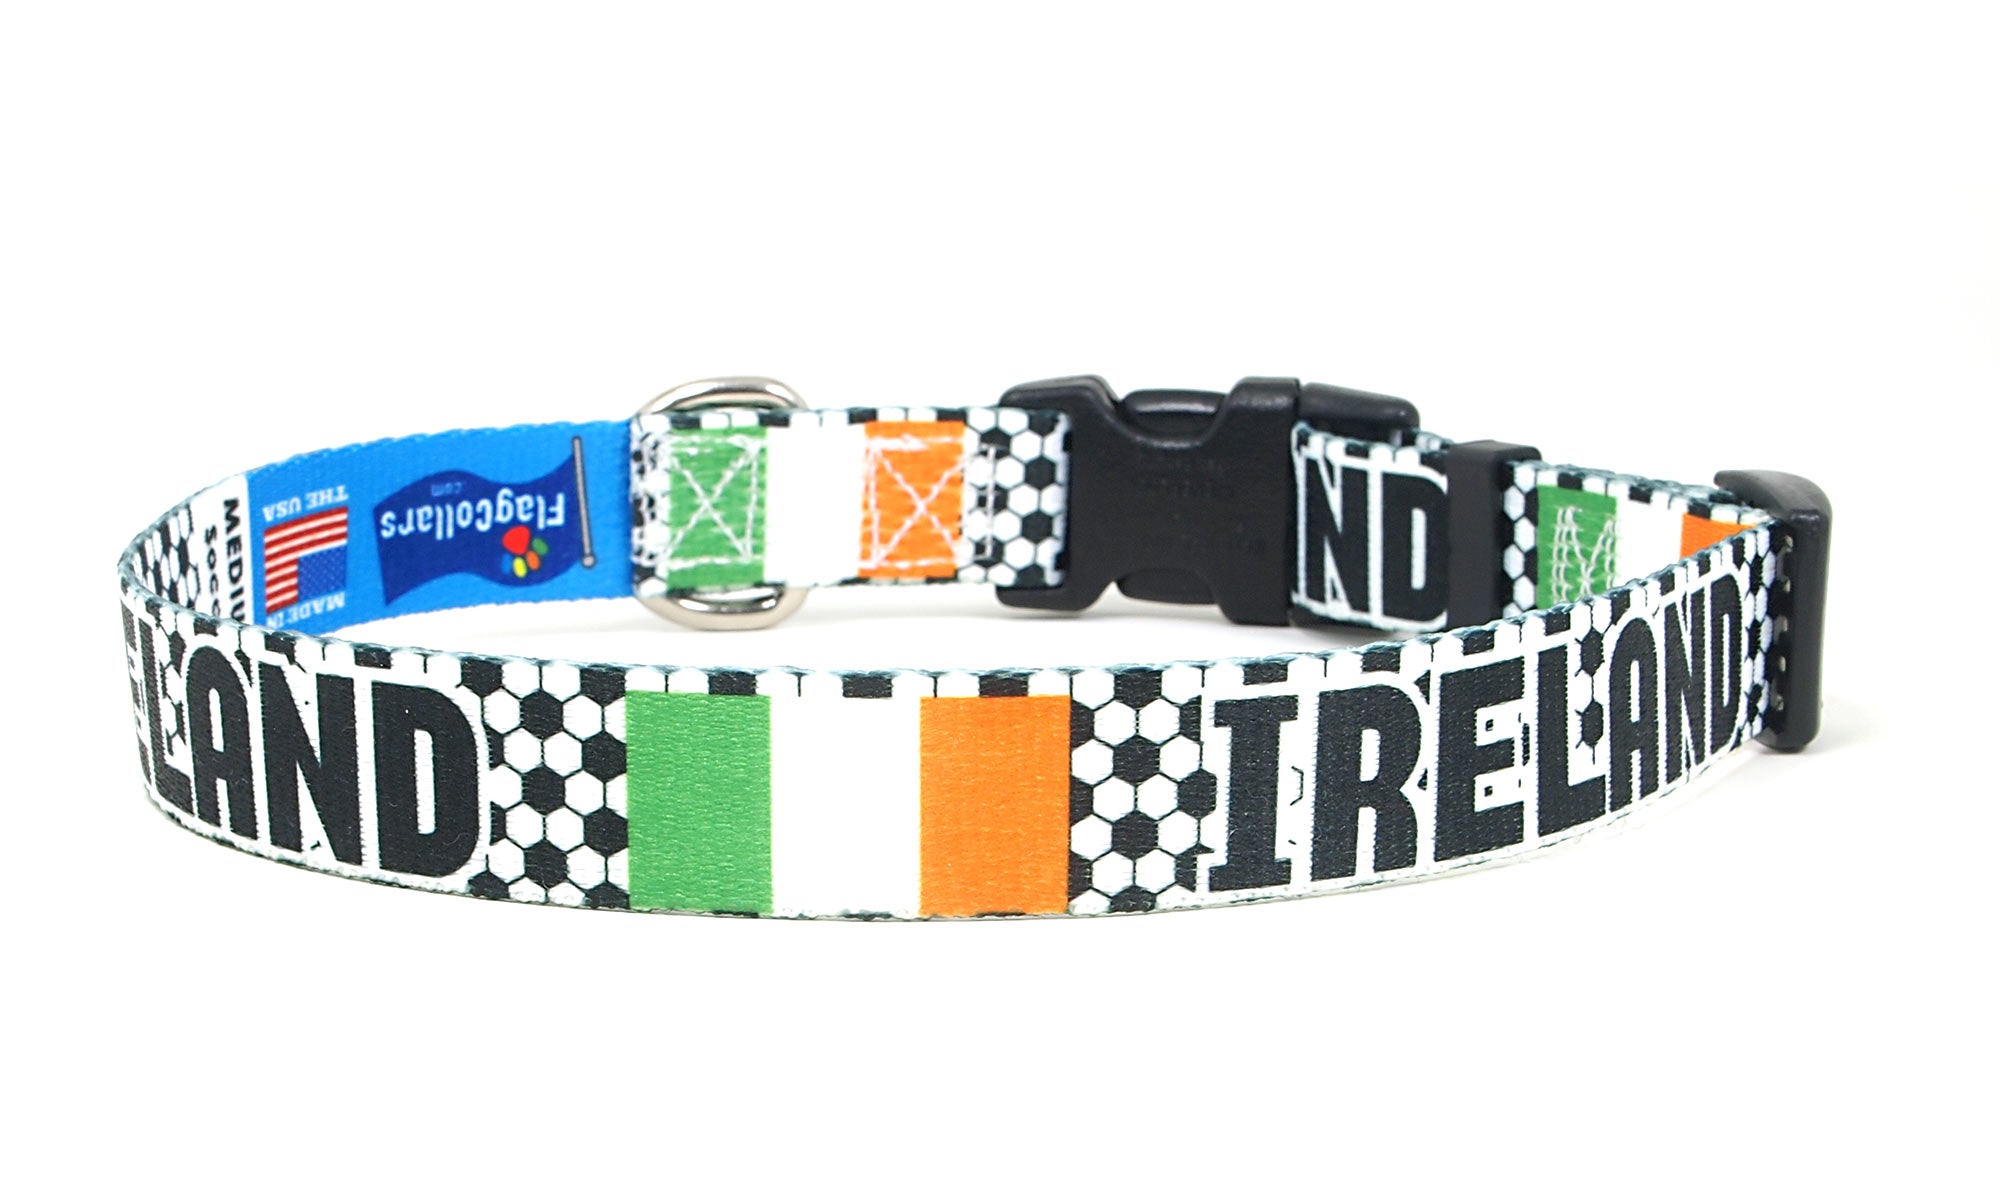 Ireland Dog Collar for Soccer Fans | Black or Pink | Quick Release or Martingale Style | Made in NJ, USA